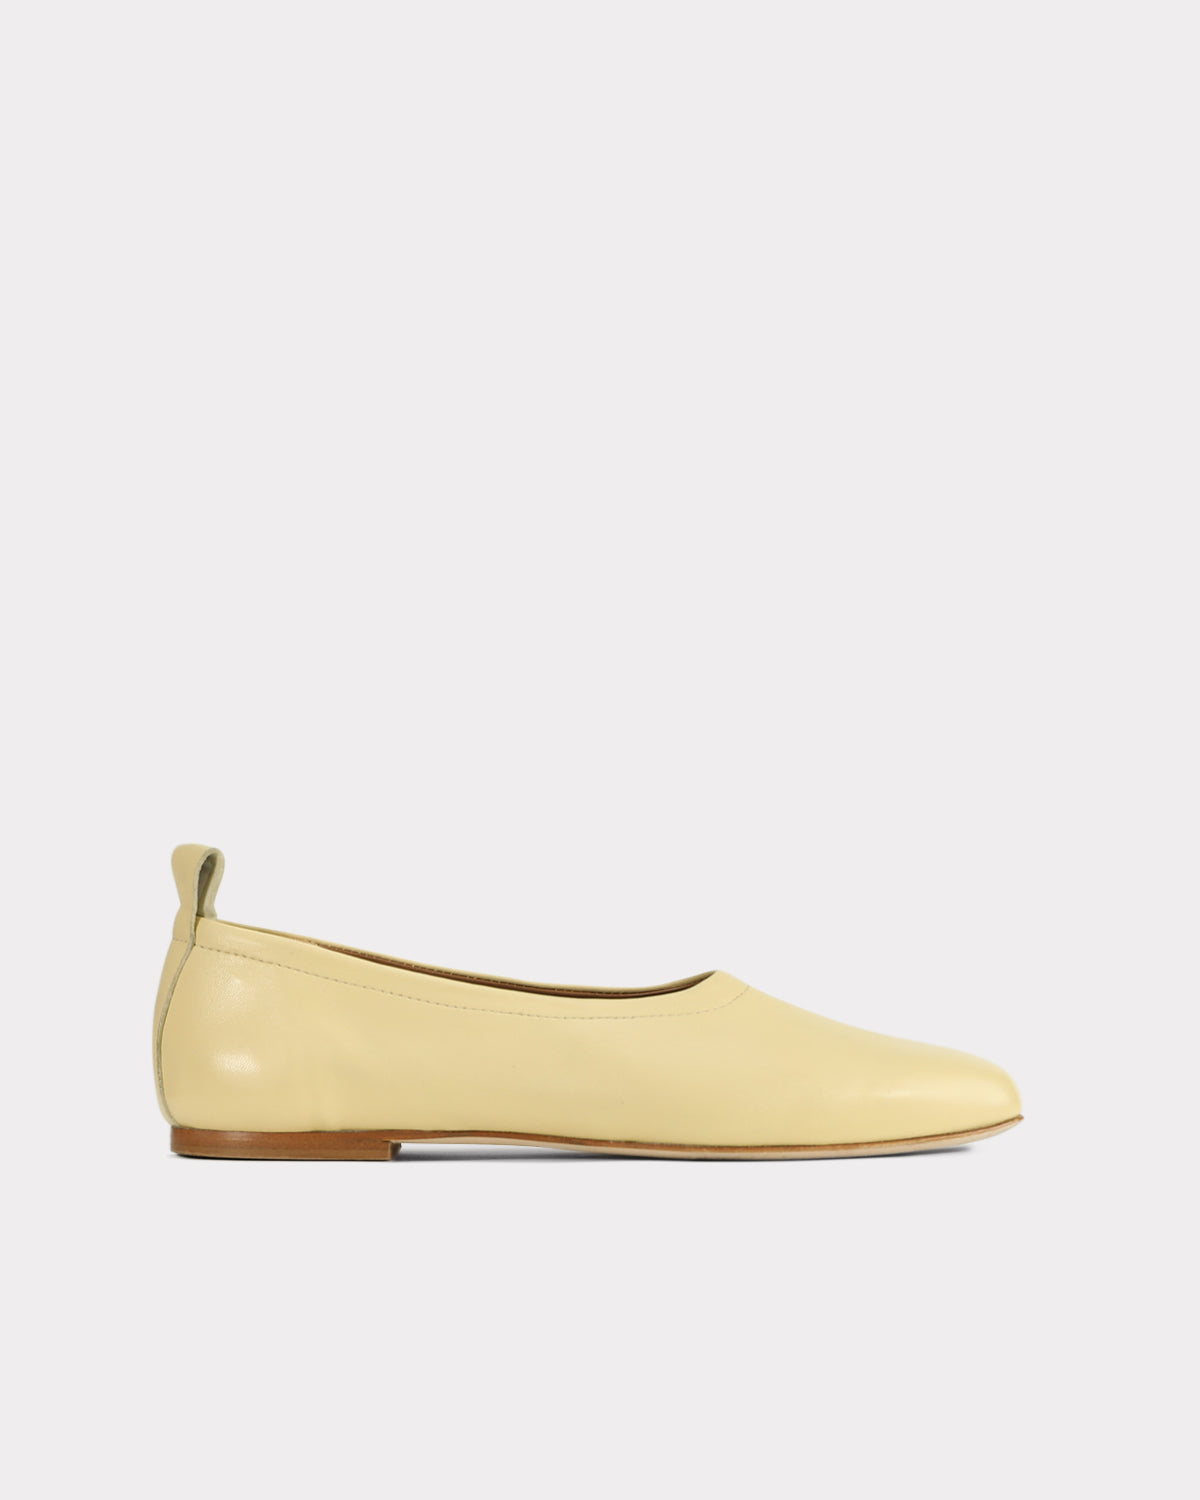 pastel yellow leather flats made from ethical materials